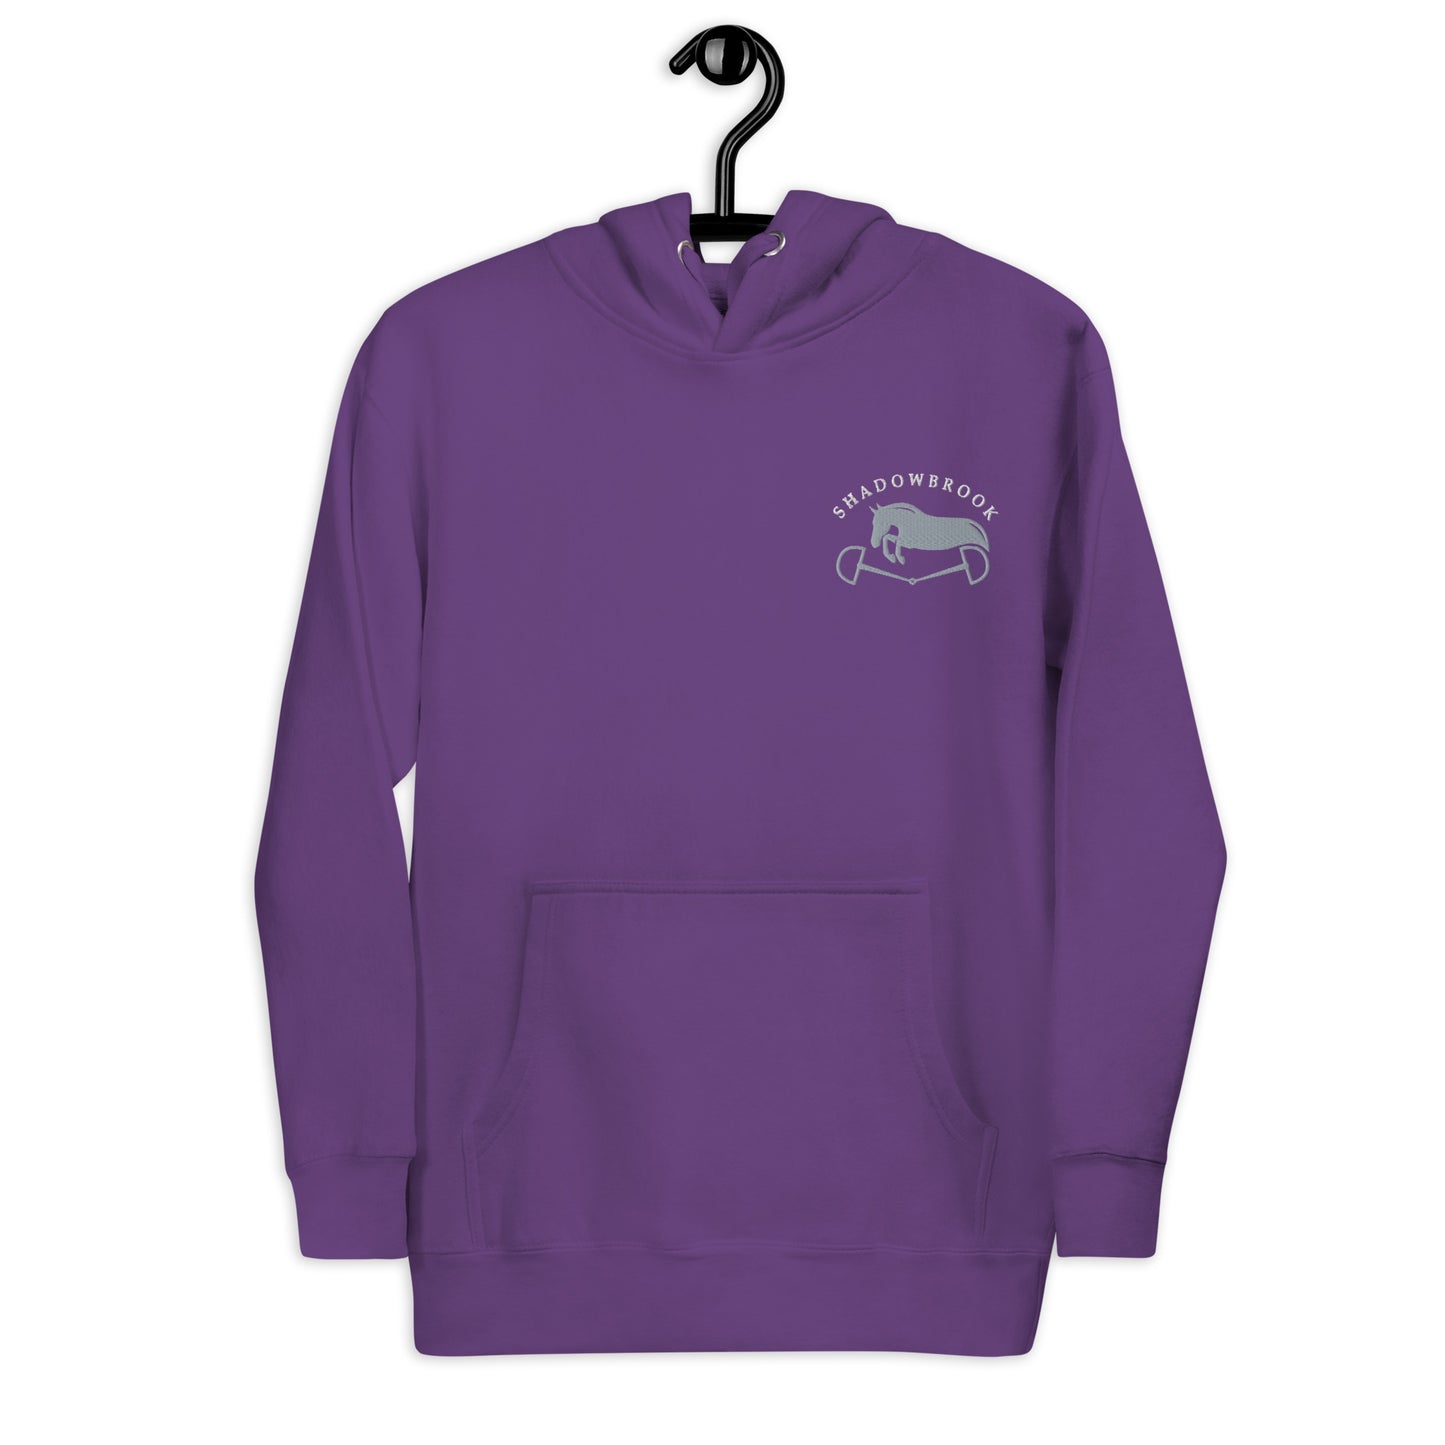 Shadowbrook Stables Purple Unisex Hoodie - Small Logo Front